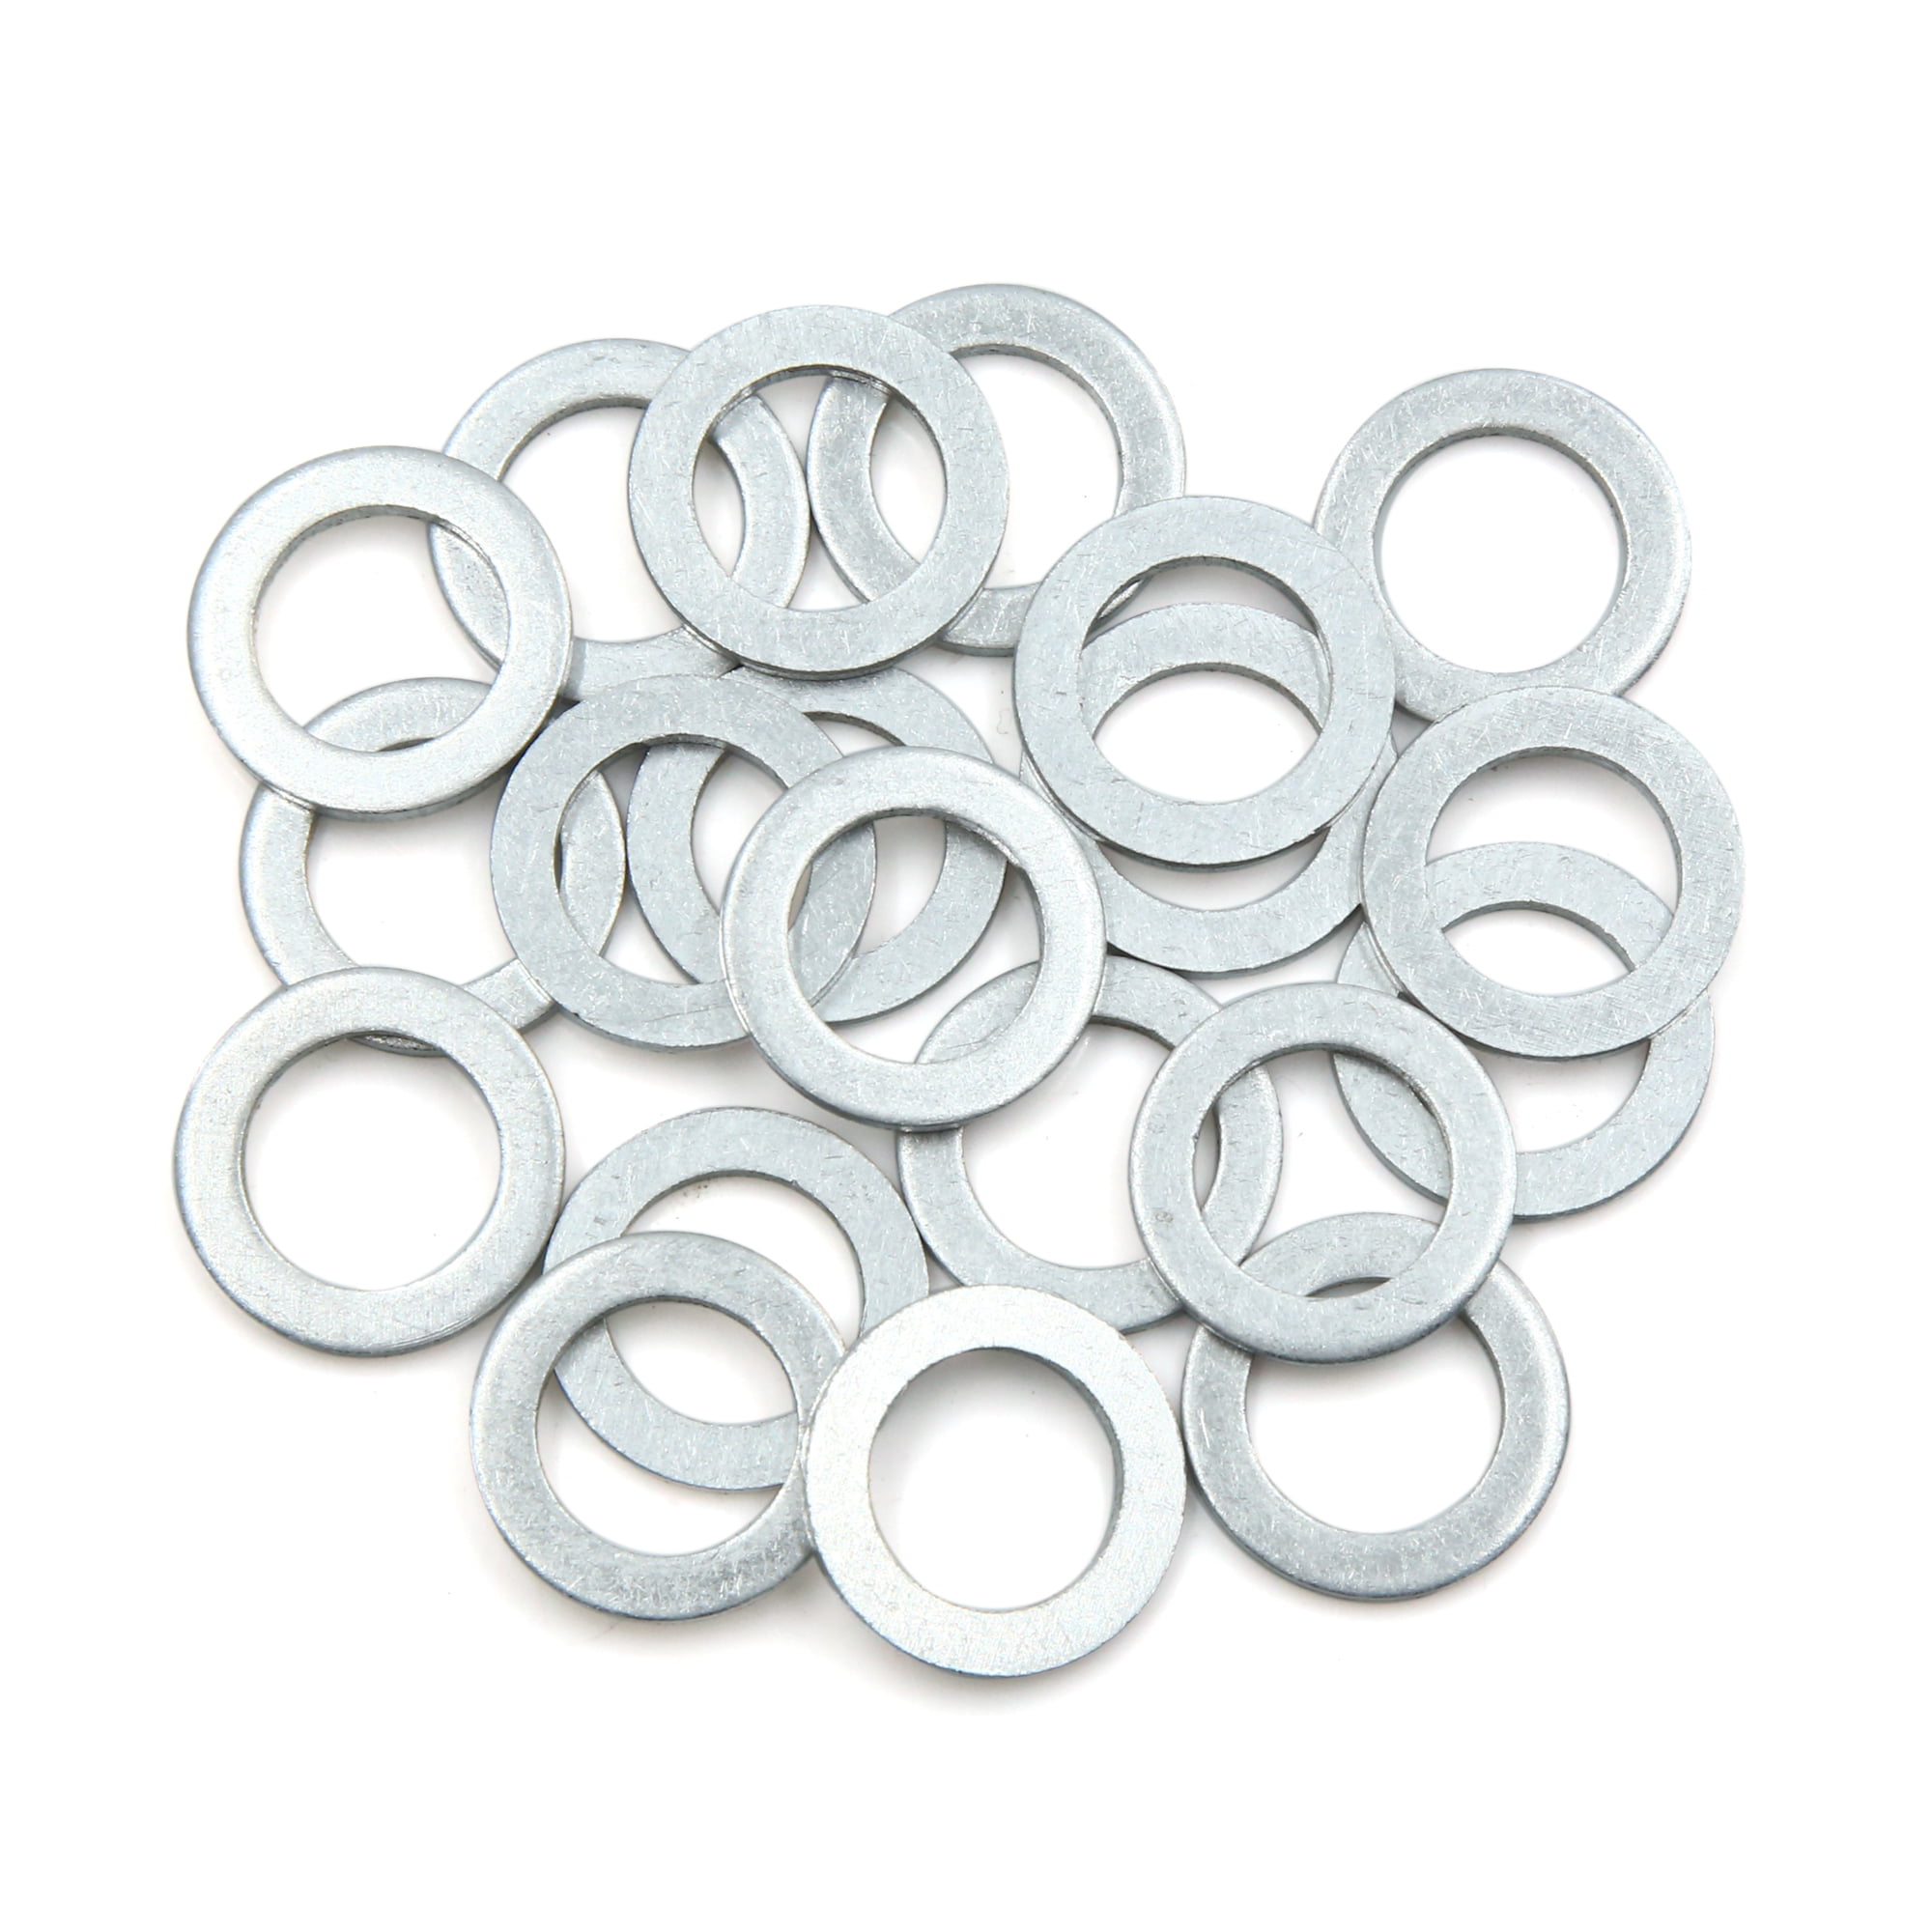 10 Pack 14MM Aluminum Oil Drain Plug Washer Gaskets 